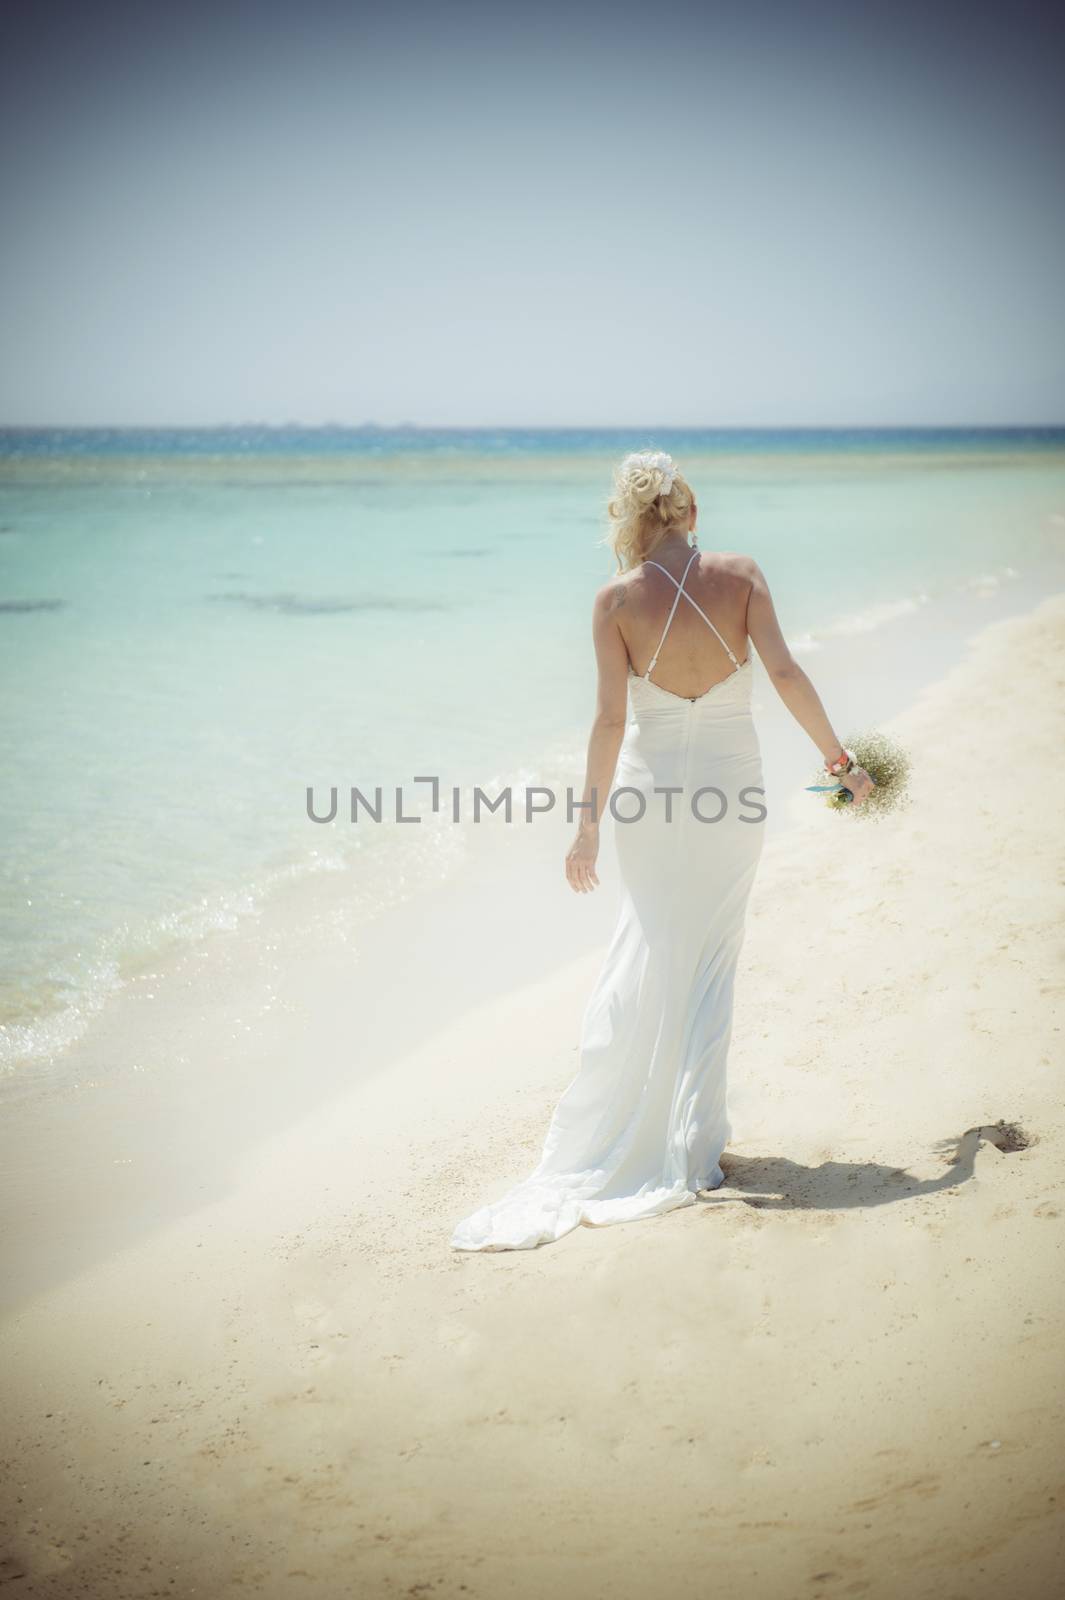 Beautiful woman bride at a tropical beach paradise on wedding day in white gown dress with ocean view vintage style photo